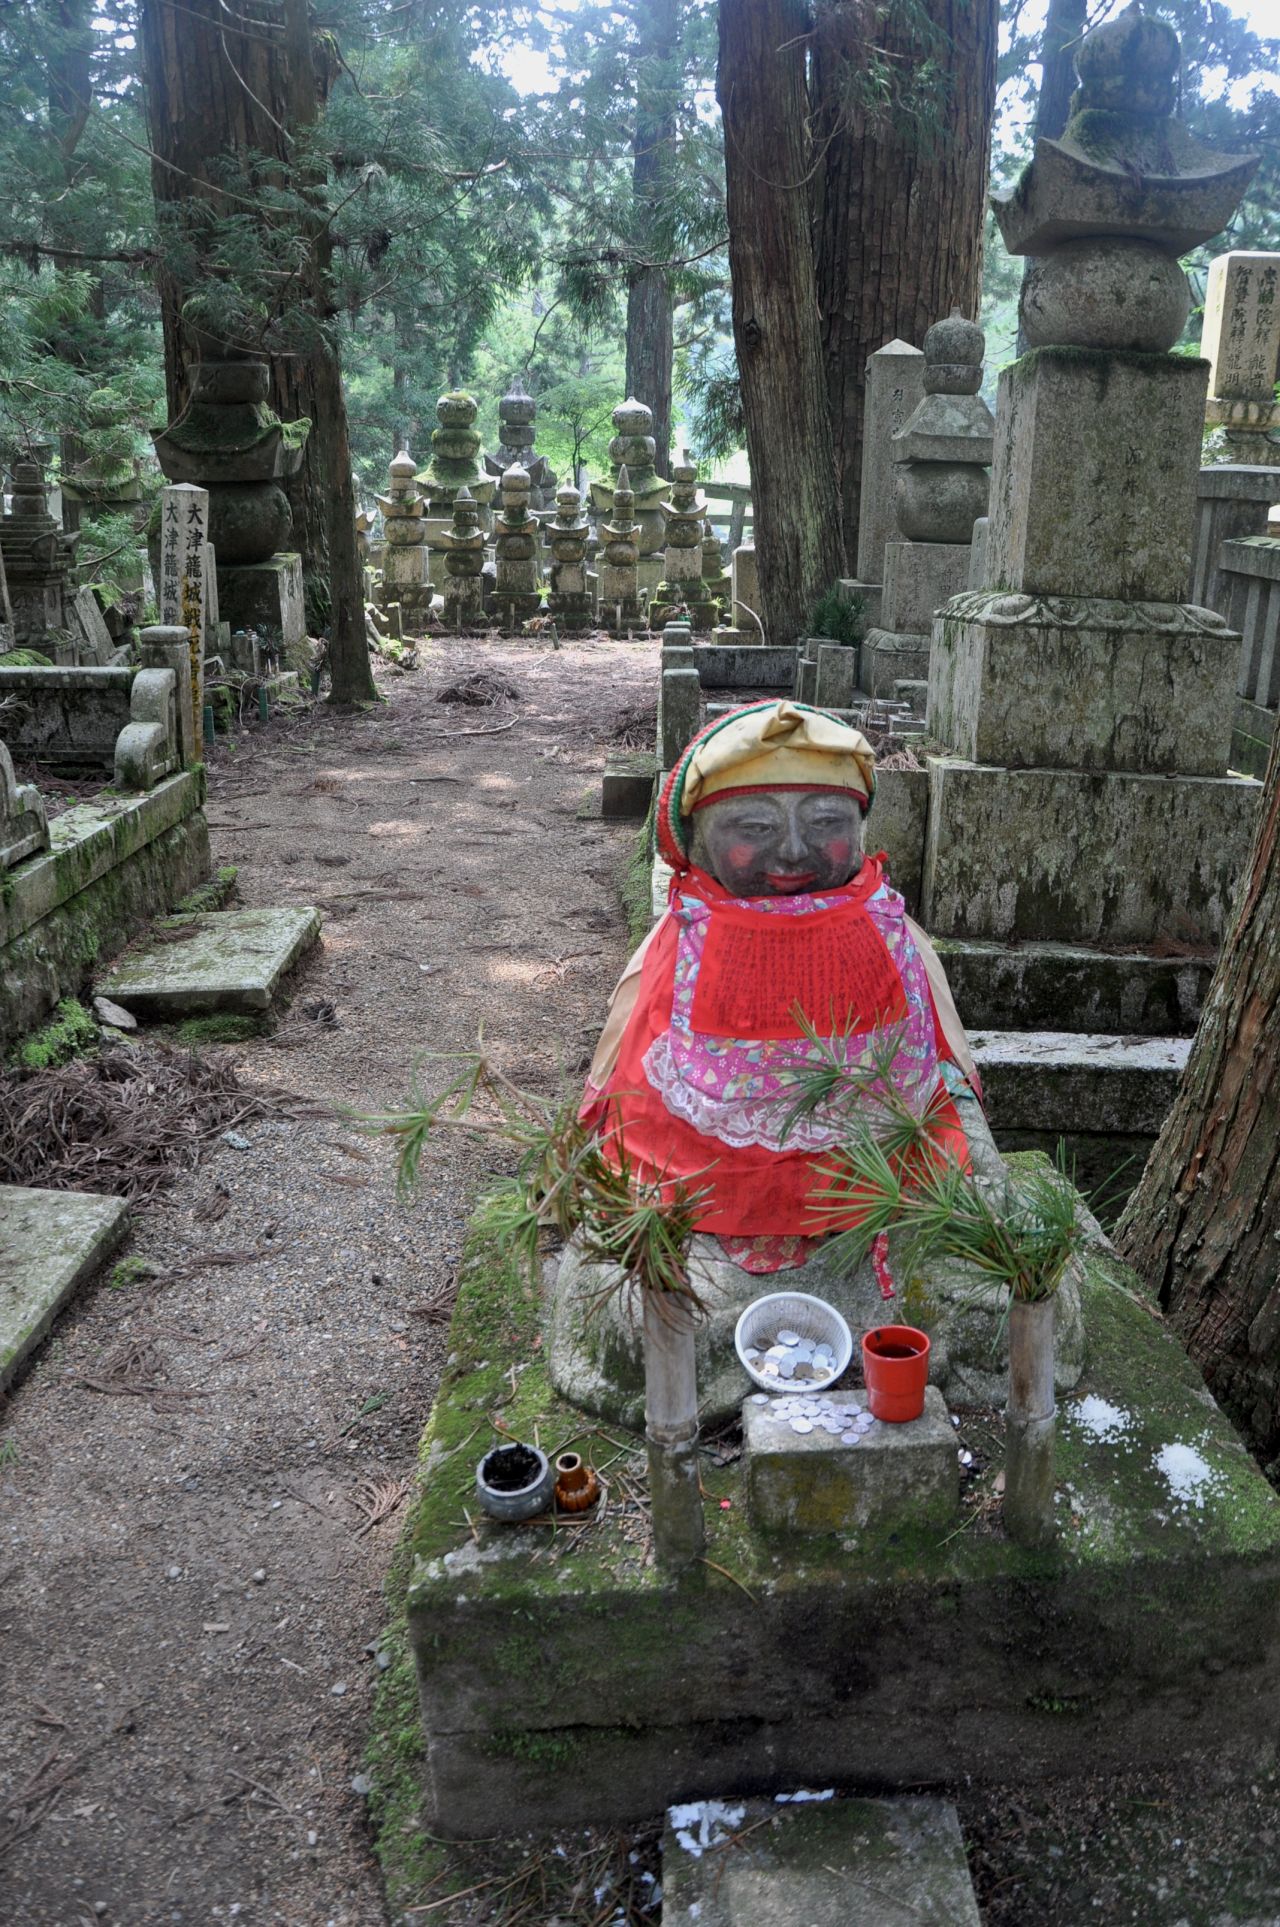 This adorable Okunoin cemetery statue is wearing makeup. People in need of some beauty come to it to make offerings. 